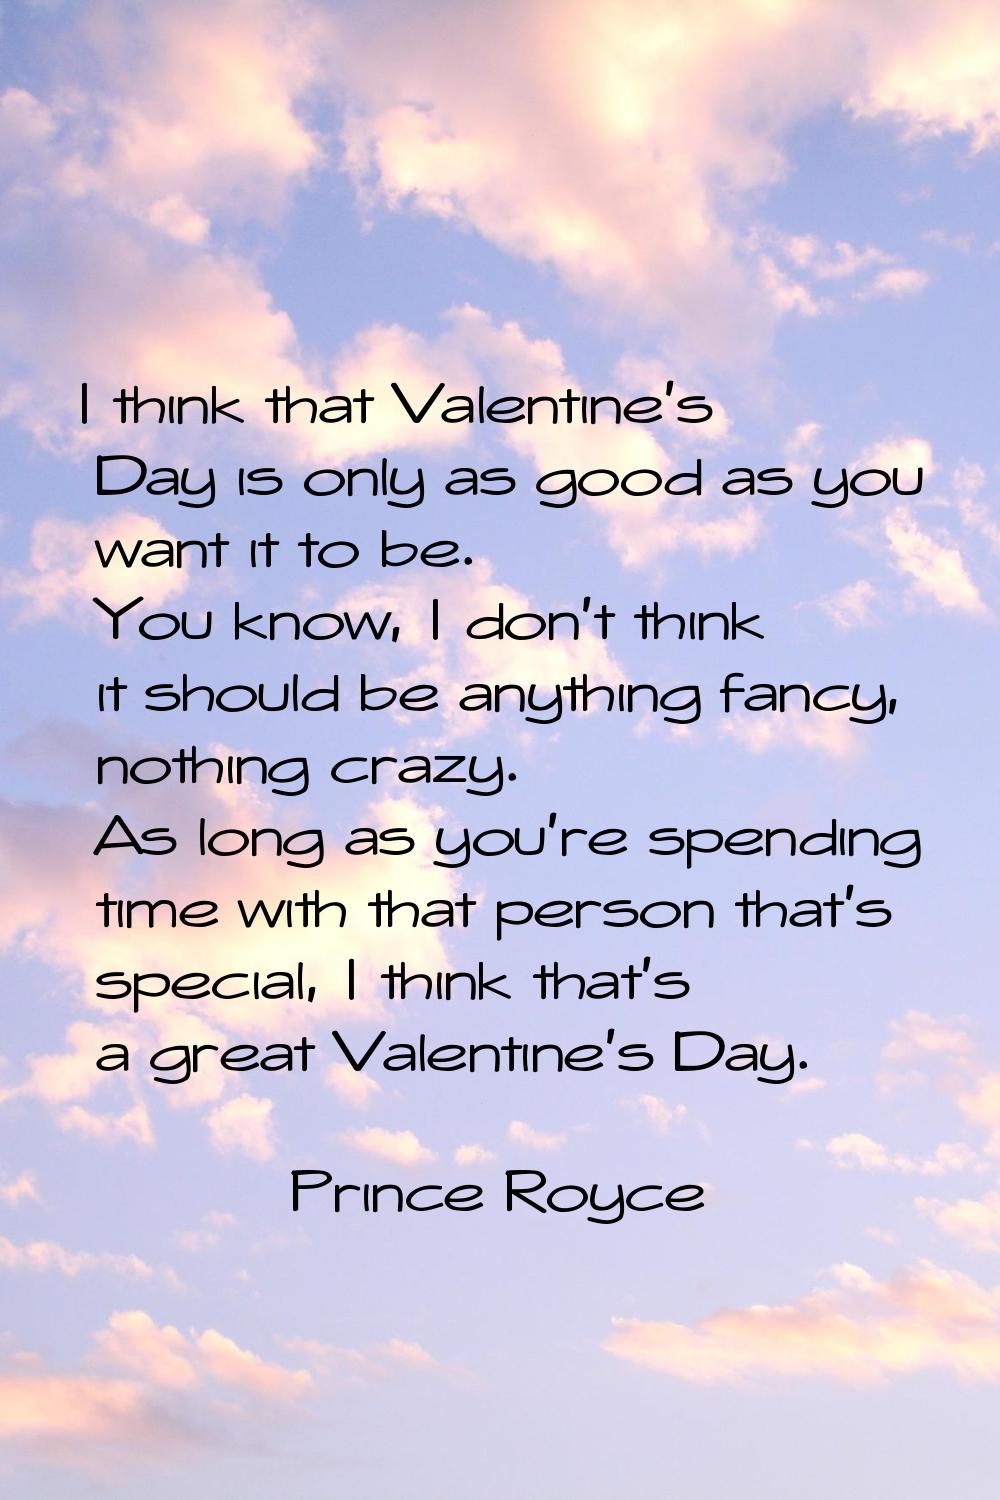 I think that Valentine's Day is only as good as you want it to be. You know, I don't think it shoul